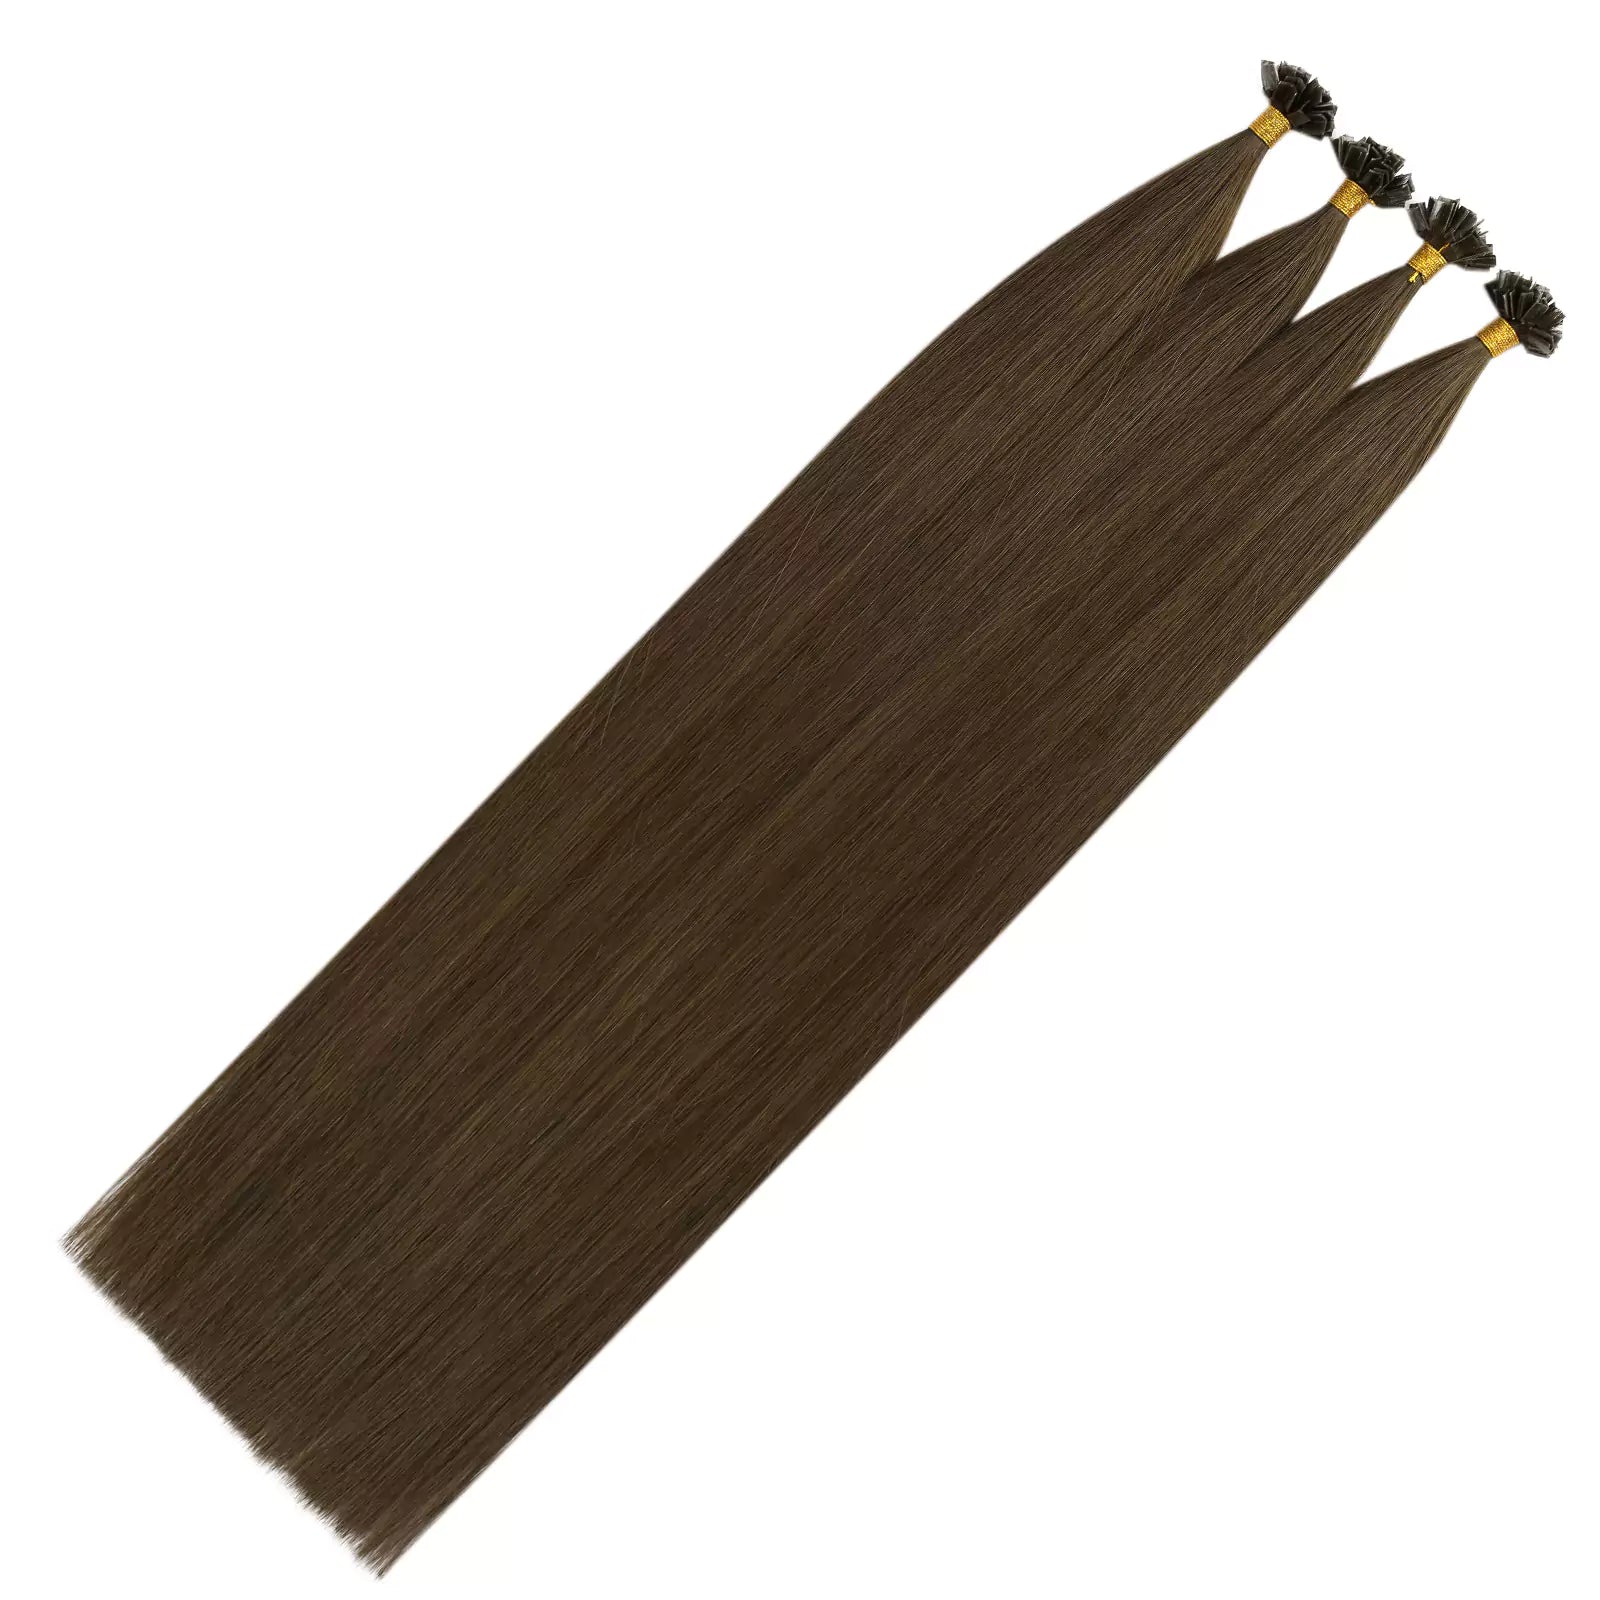 Crafted from high-quality human hair, K tip extensions seamlessly blend with your natural hair, delivering an incredibly authentic appearance and texture.